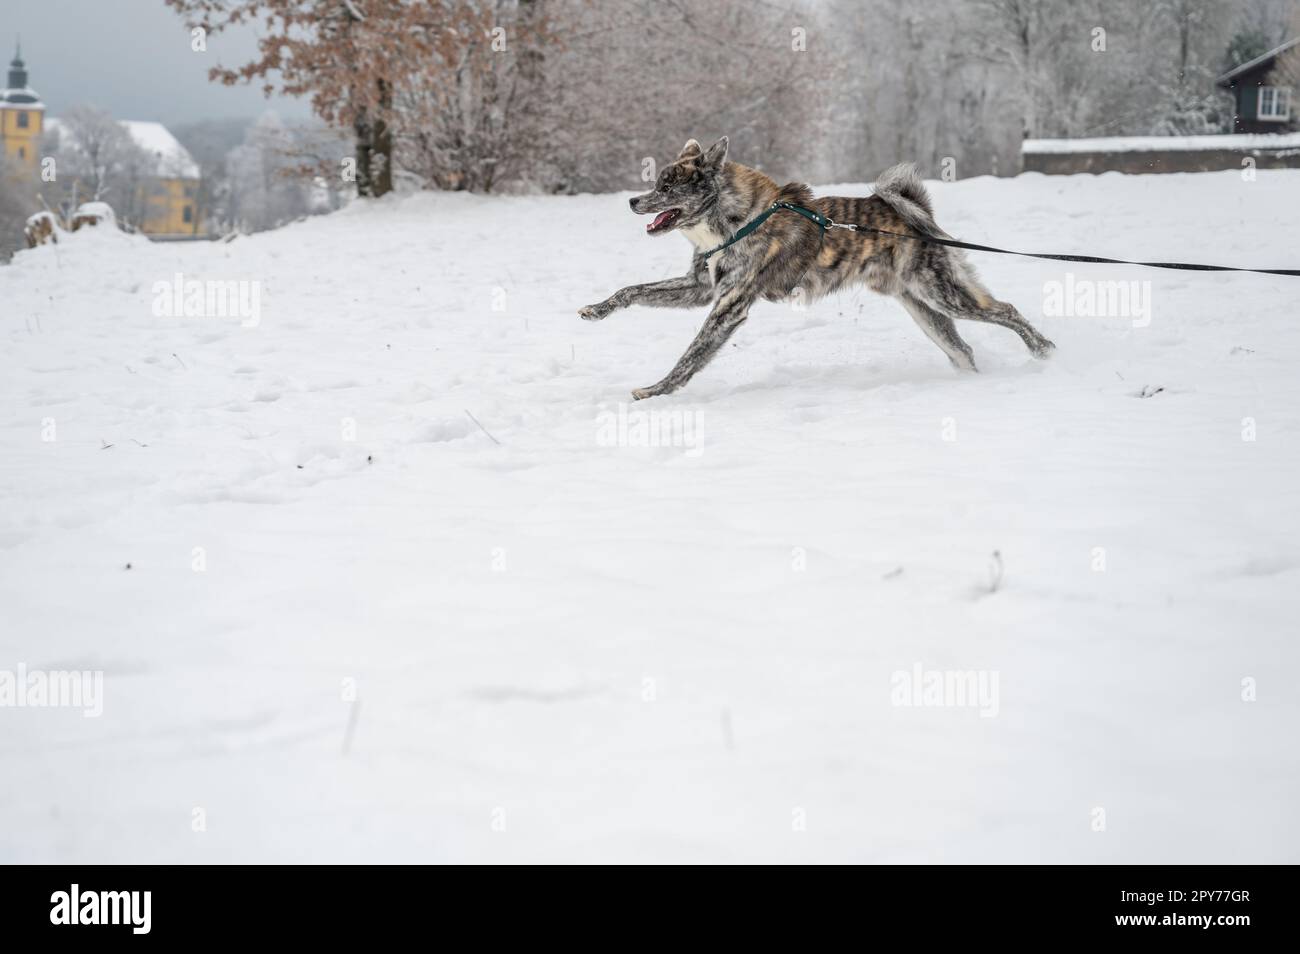 Akita inu Dog with gray fur is running through the snow during winter Stock Photo